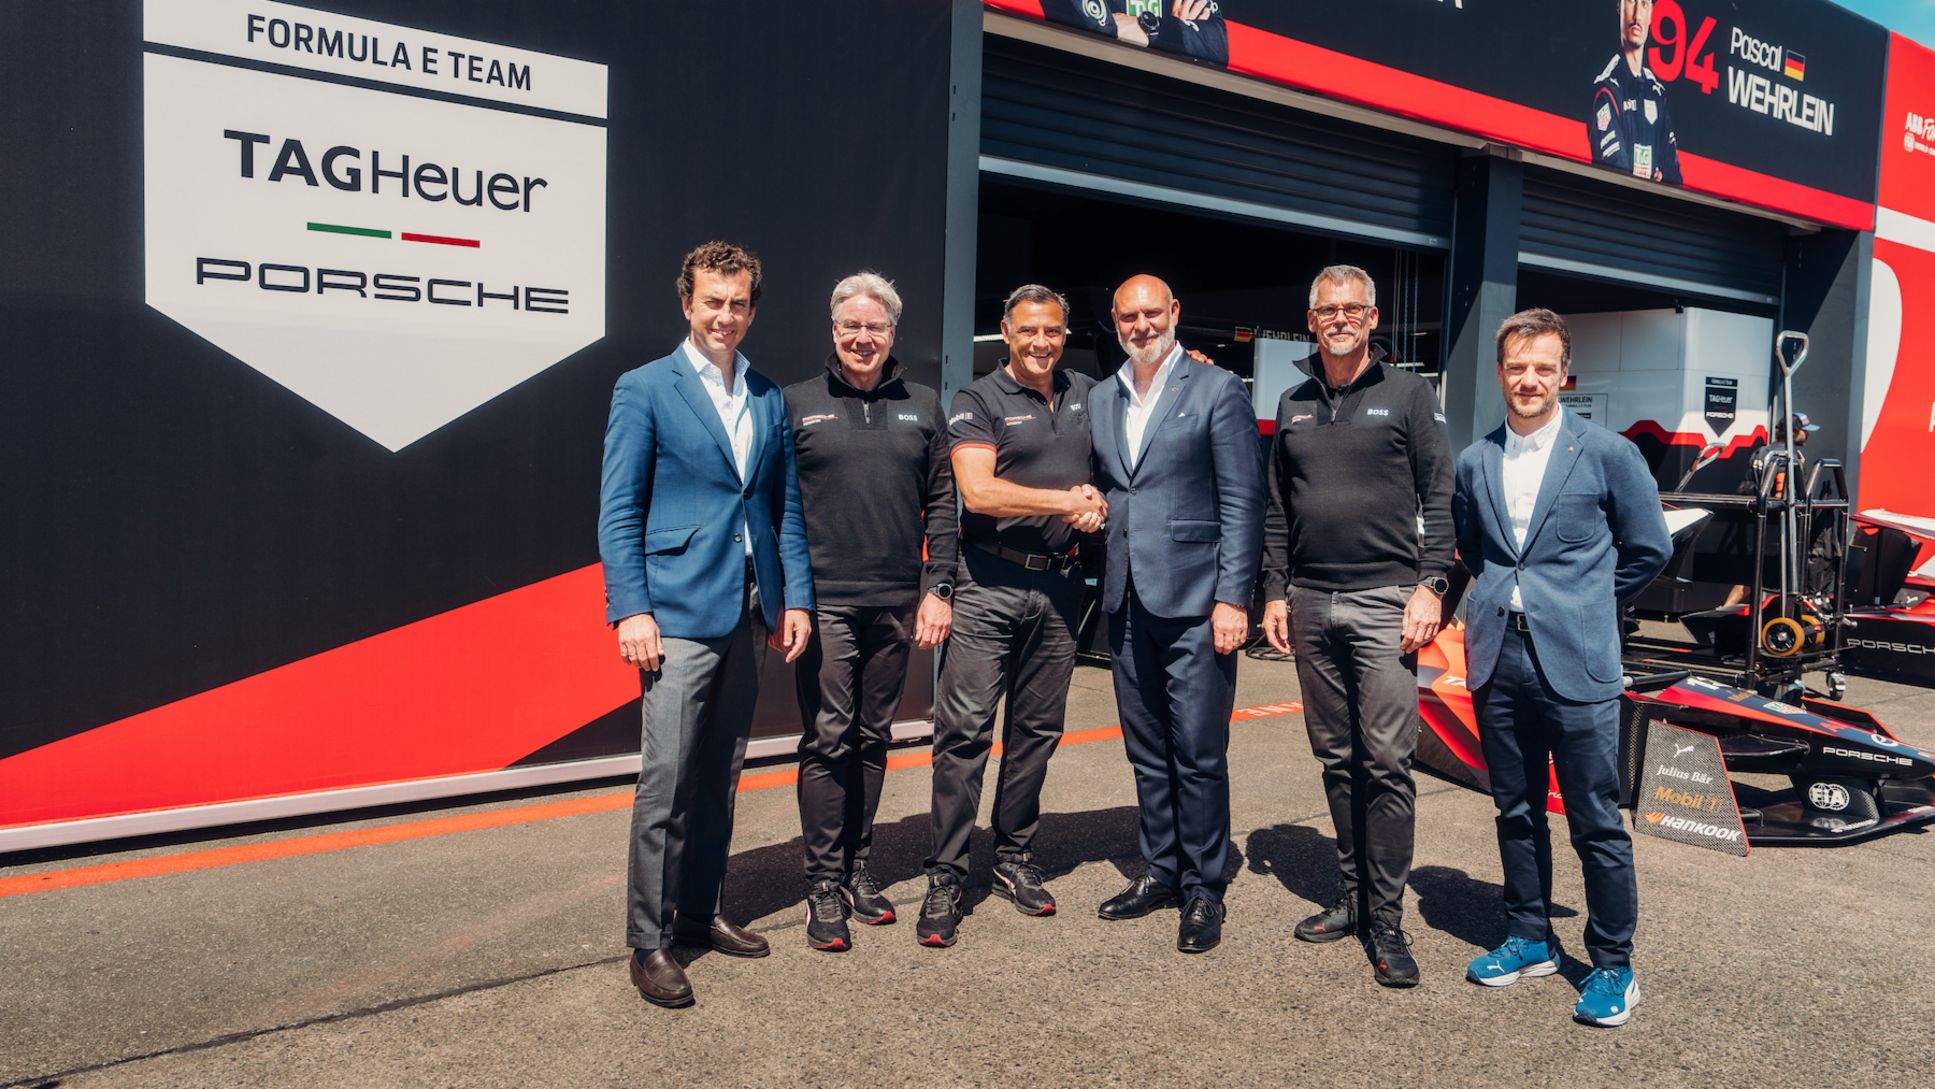 Alberto Longo, Chief Championship Officer and Co-Founder, Formula E; Andreas Haffner, Member of the Executive Board, Human Resources and Social Affairs, Porsche AG; Michael Steiner, Member of the Executive Board, Research and Development, Porsche AG; Jeff Dodds, CEO of Formula E; Thomas Laudenbach, Vice President Porsche Motorsport; Pablo Martino, Head of Formula E Championship, FIA, 2024, Porsche AG